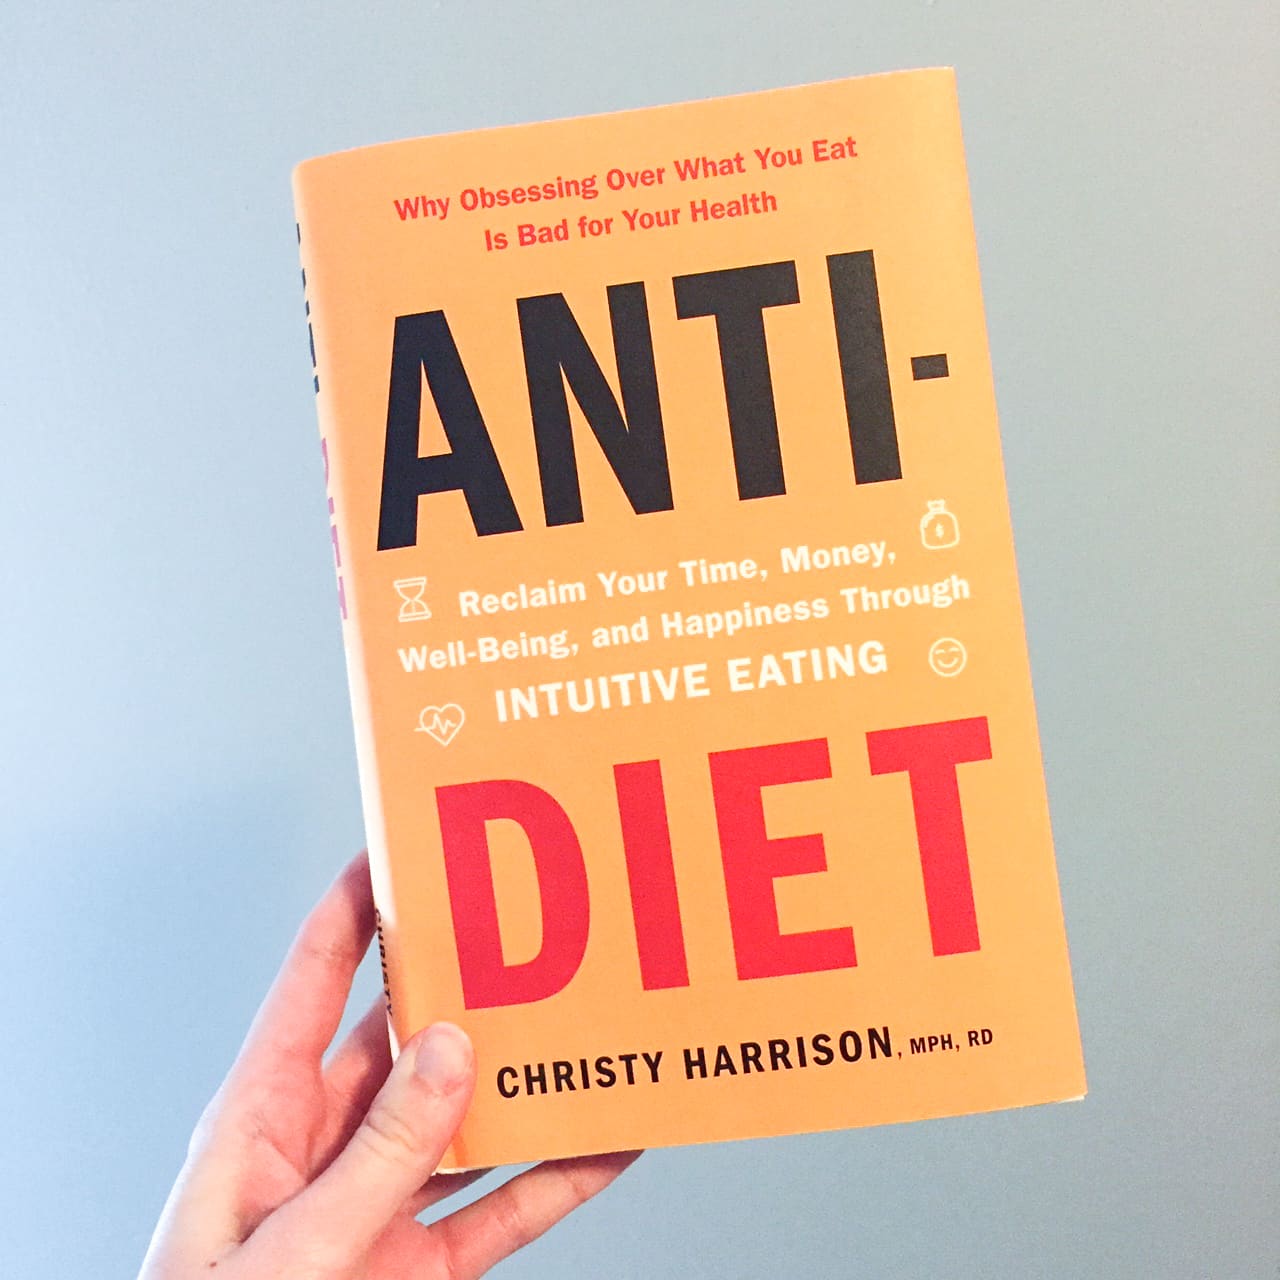 Why Everyone Should Read the Anti-Diet Book by Christy Harrison